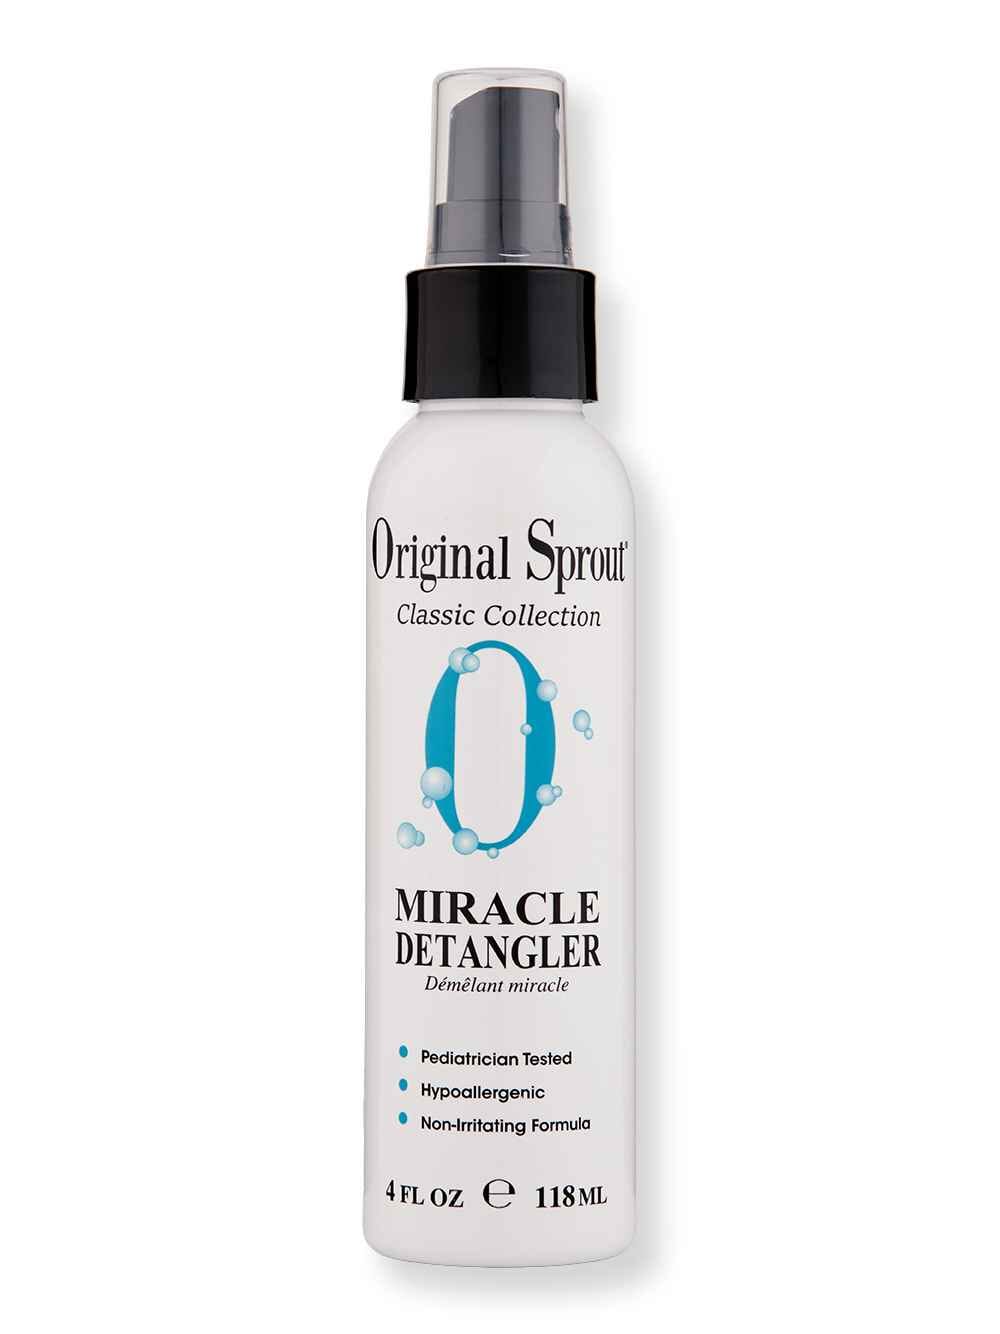 Original Sprout Original Sprout Miracle Detangler 4 oz Styling Treatments 